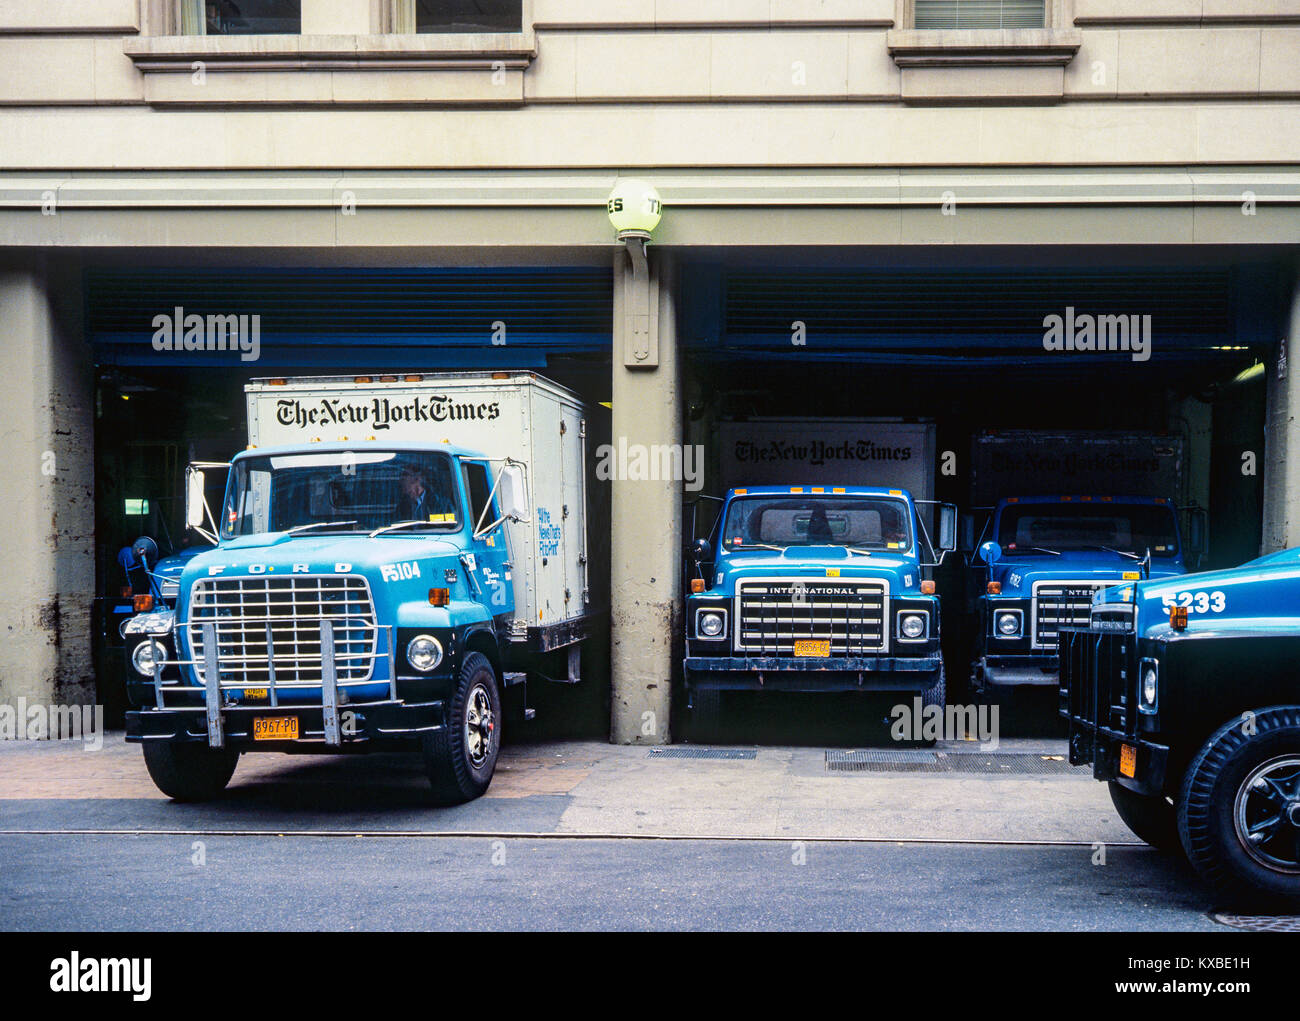 New York 1980s, The New York Times, livraison de camions, 229 West 43rd Street, Manhattan, New York City, NY, NYC, ÉTATS-UNIS, Banque D'Images